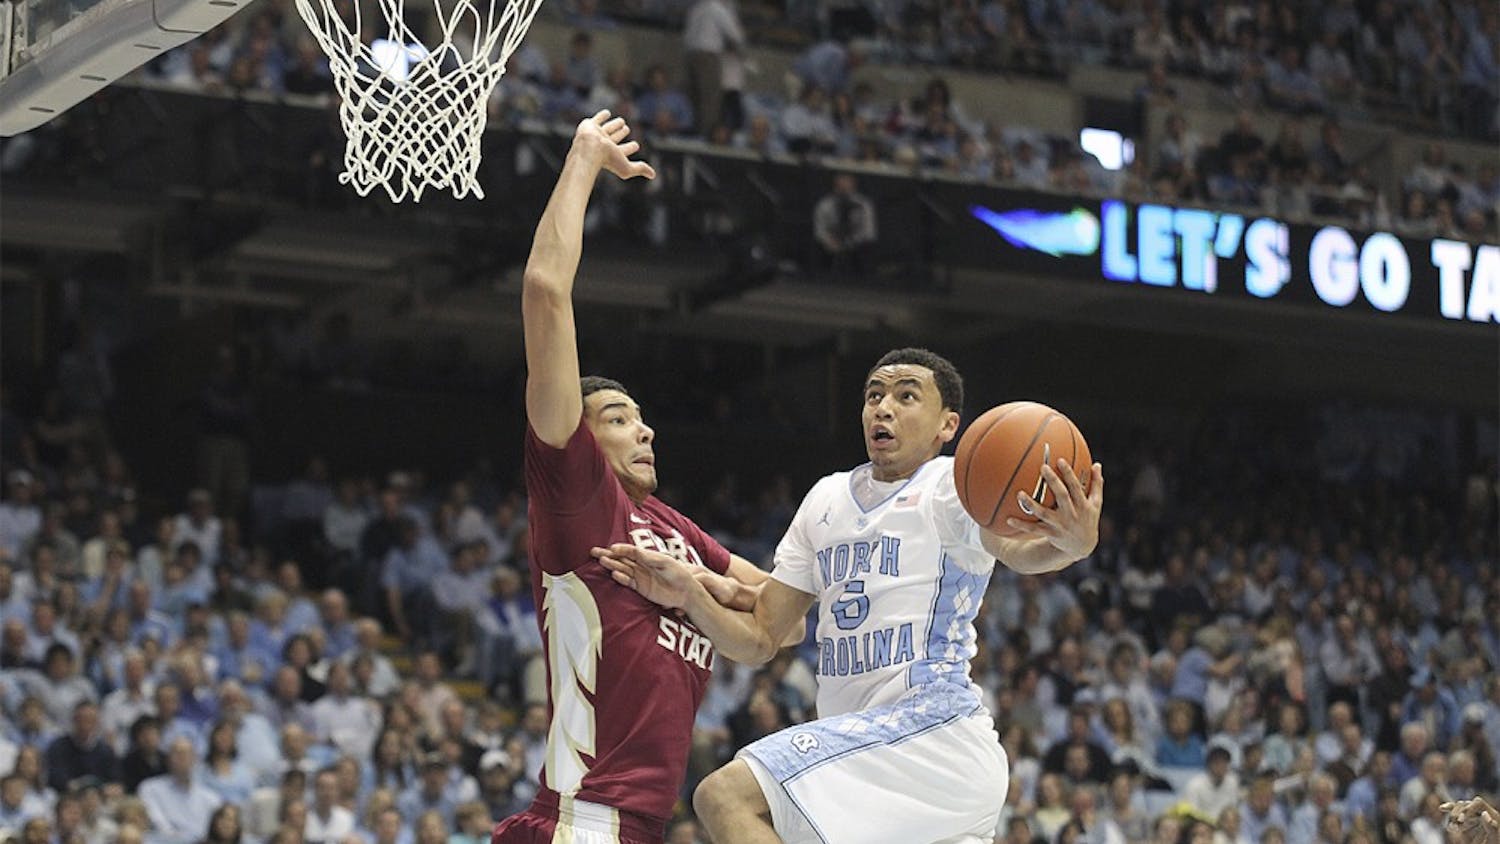 Junior point guard Marcus Paige goes up for a layup against a Florida State defender in a game on Feb. 17, 2014.